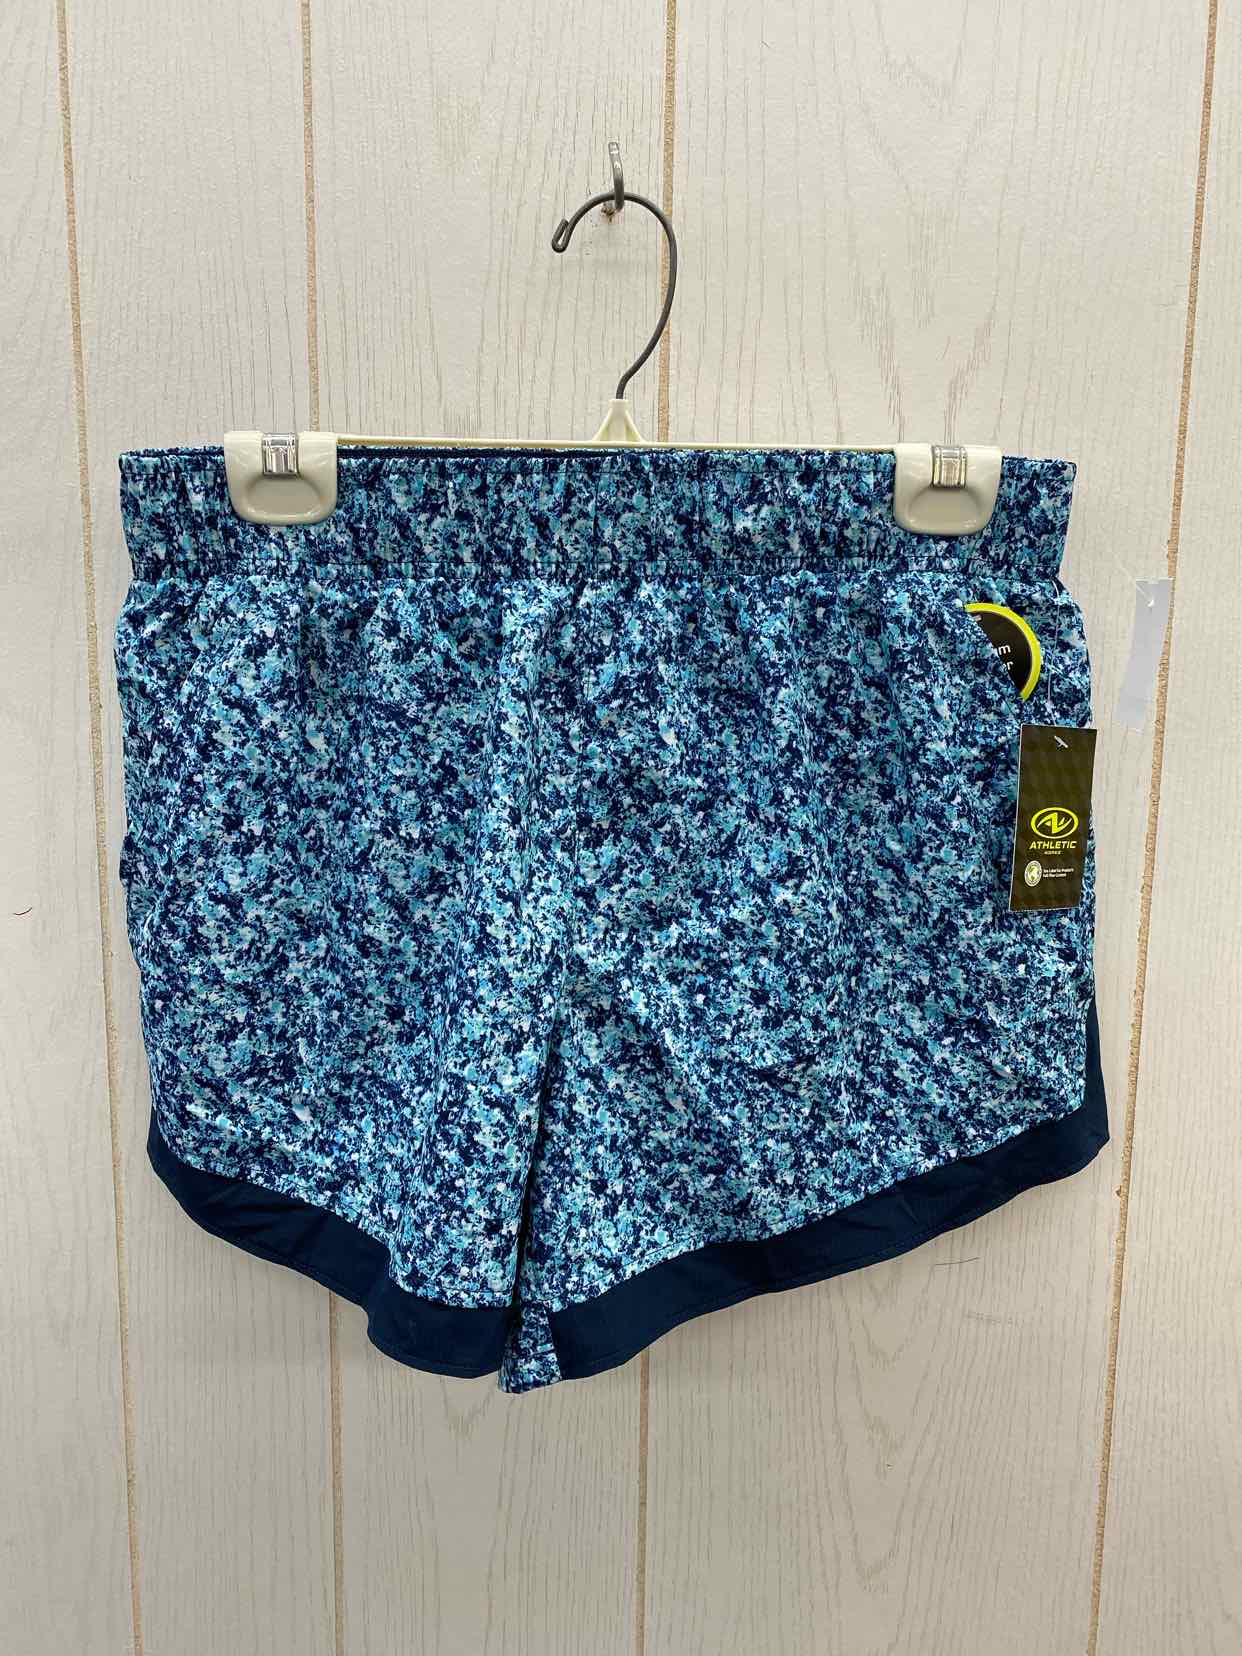 Athletic Works Blue Womens Size M Shorts